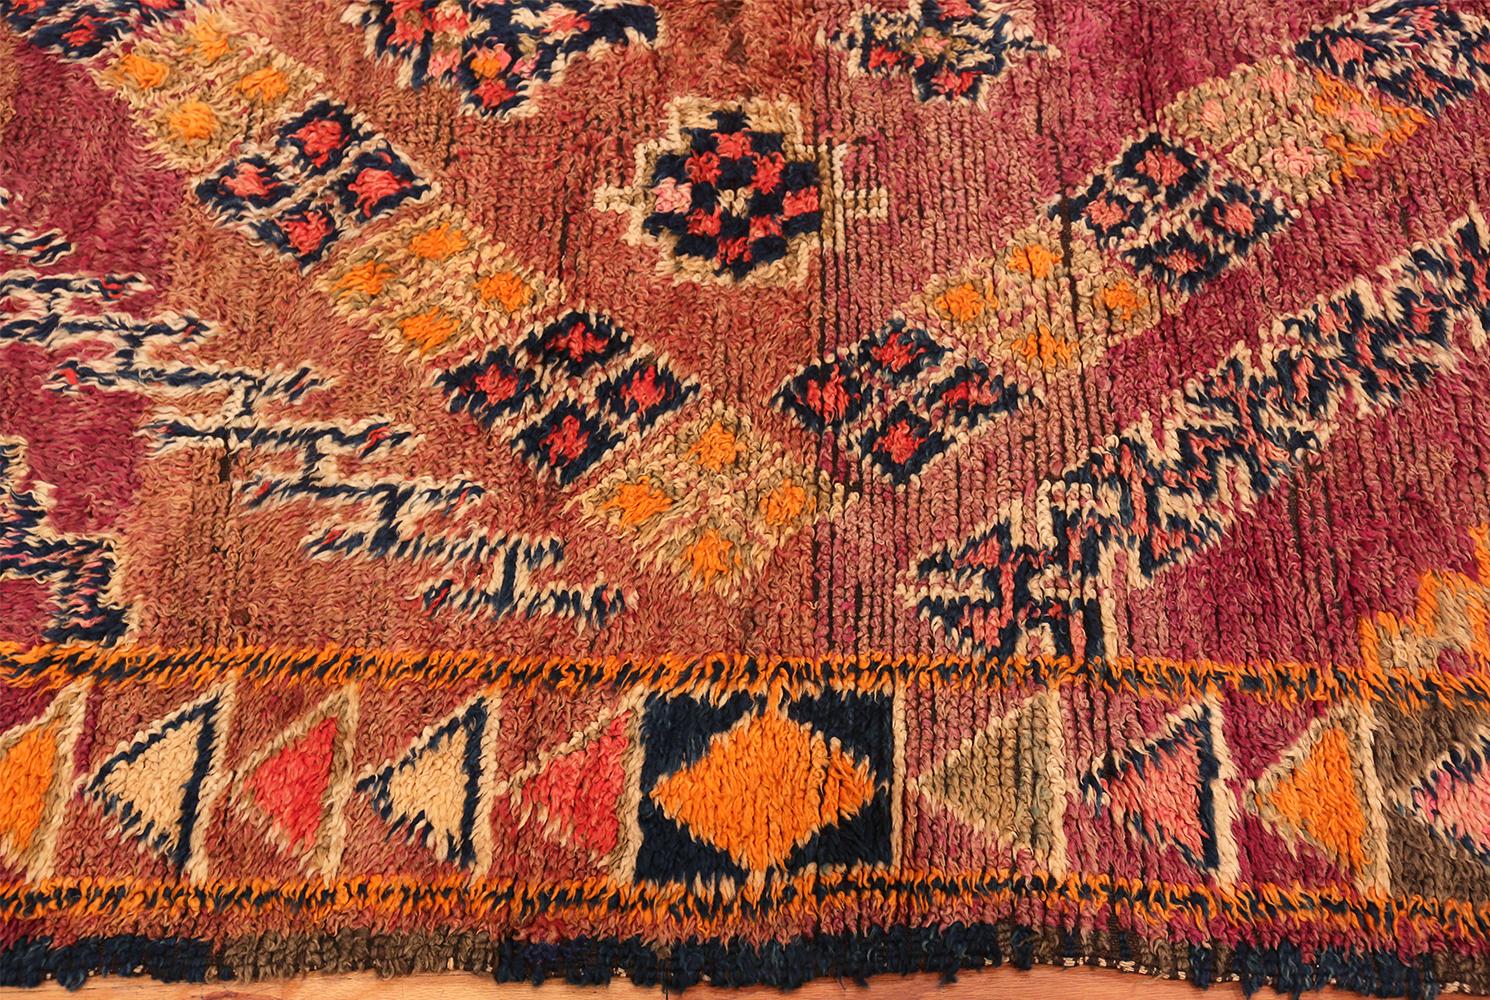 Beautiful vintage Folk Art Moroccan rug, country of origin: Morocco, date circa mid-20th century. Size: 6 ft. 4 in x 12 ft. 2 in (1.93 m x 3.71 m).